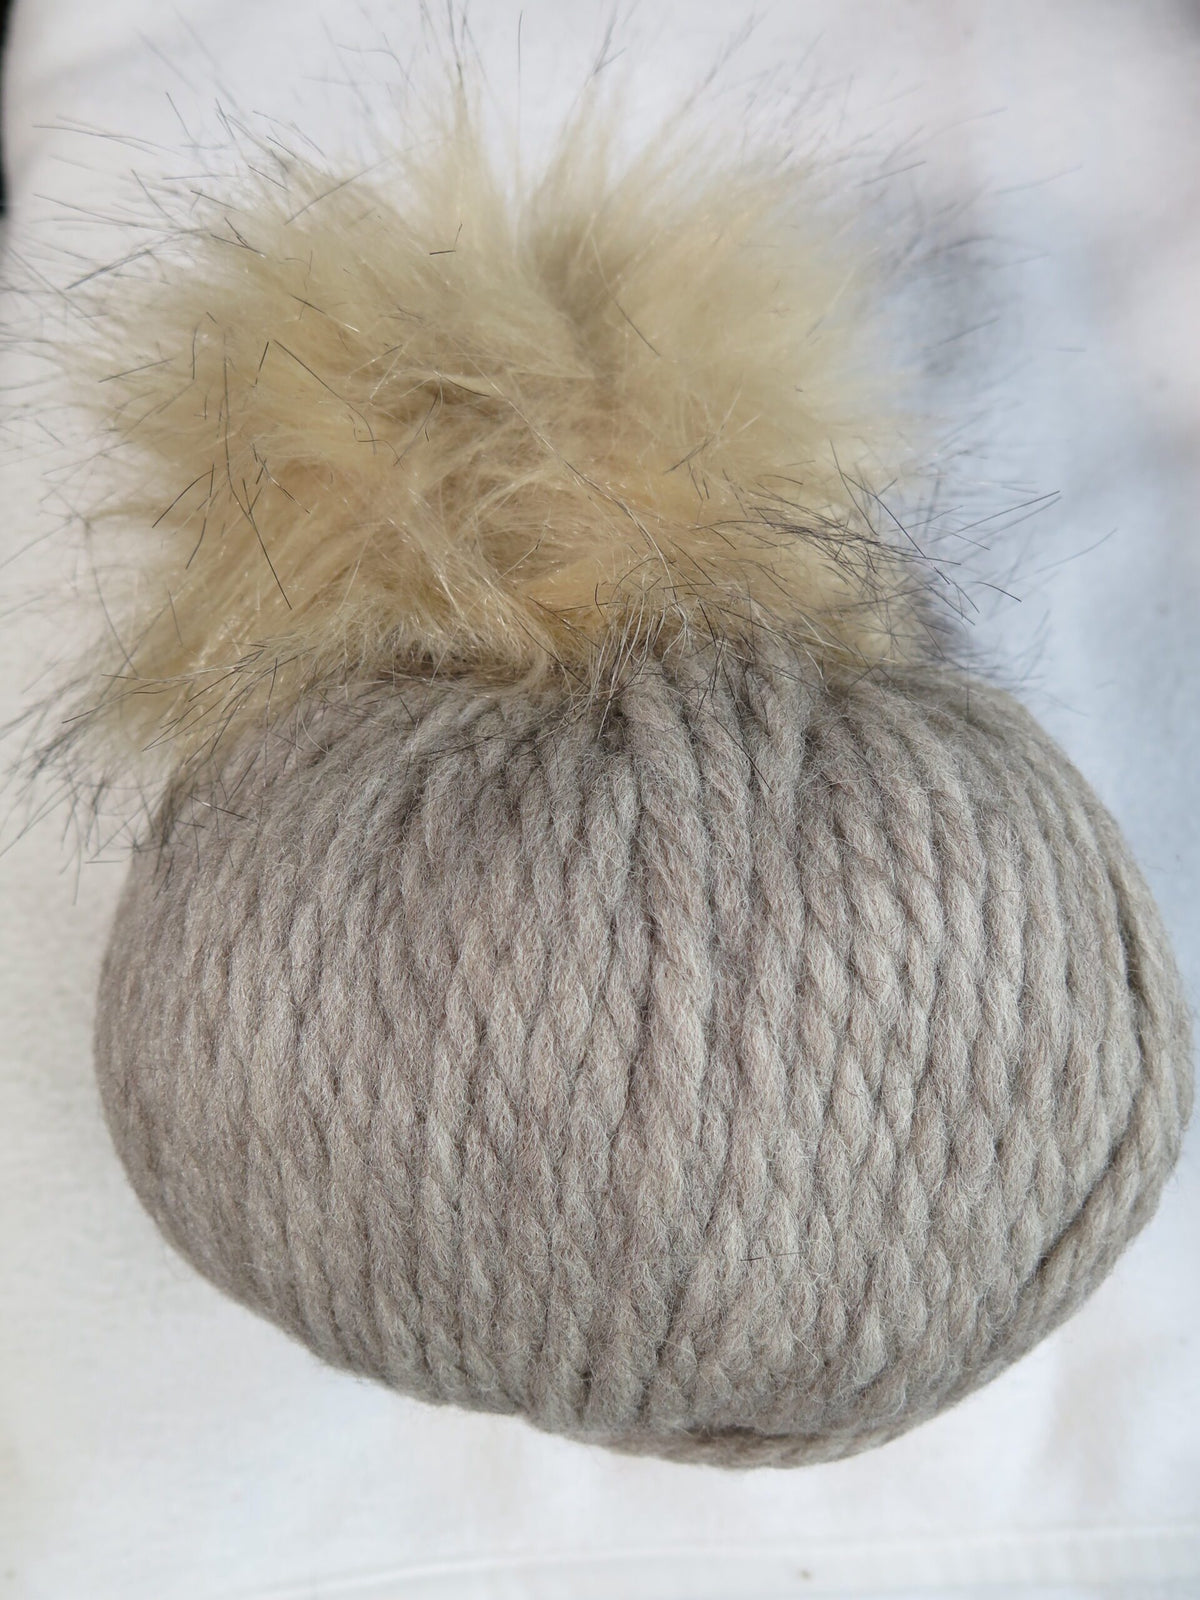 Cascade Yarns Lana Grande Hat Kit - Antique and Fawn